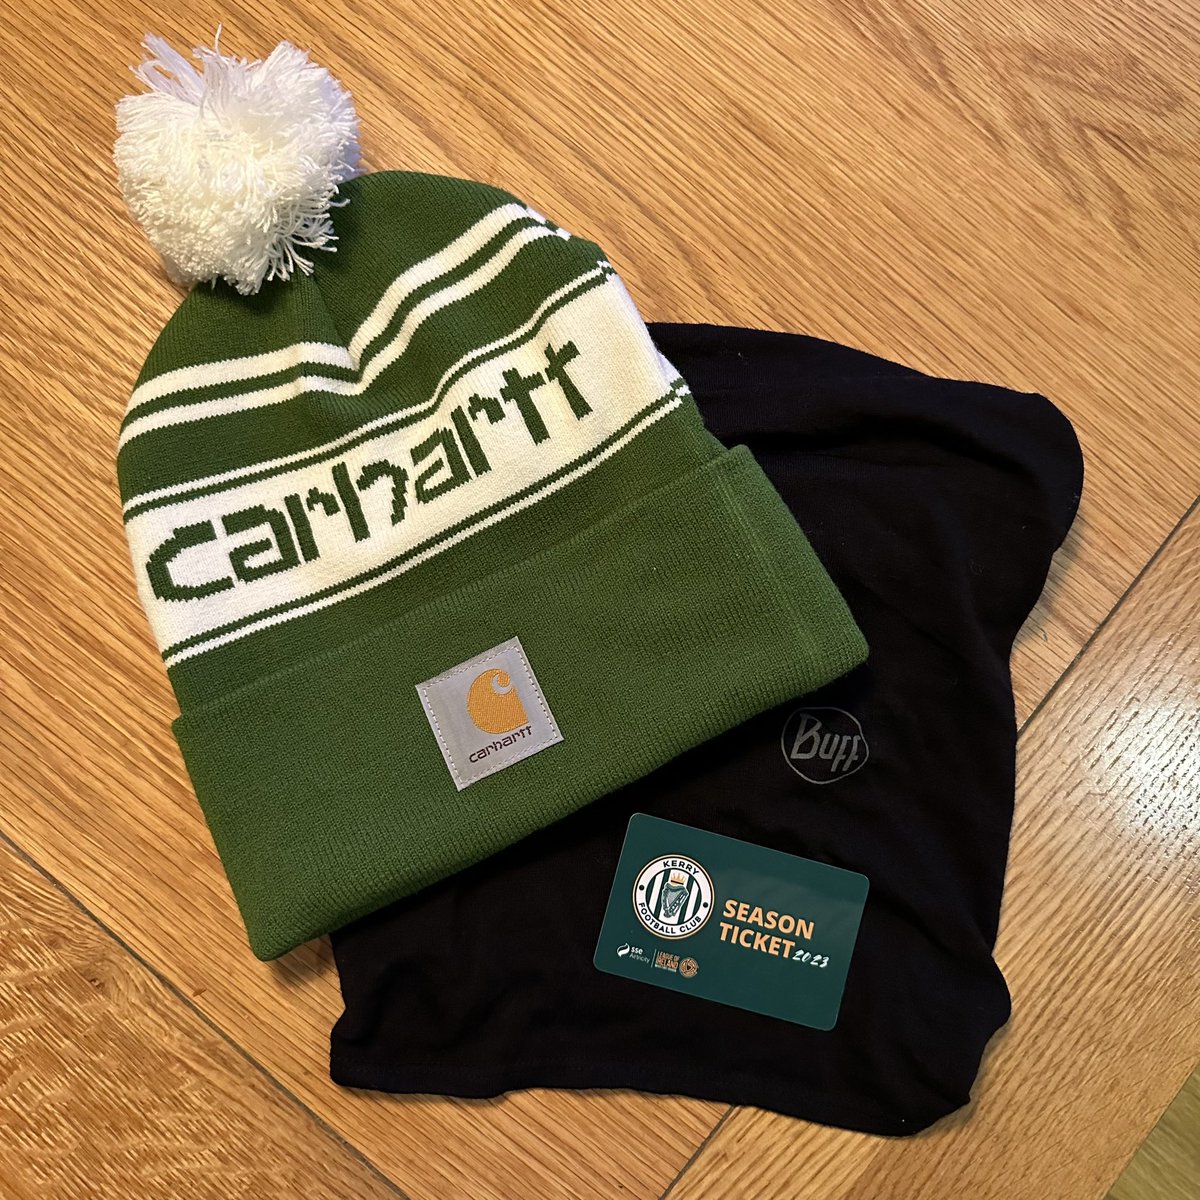 And now for something a bit different. Off to support @KerryFC in their first ever @LeagueofIreland match. ⚽️

[@CarharttWIP @BuffLife]